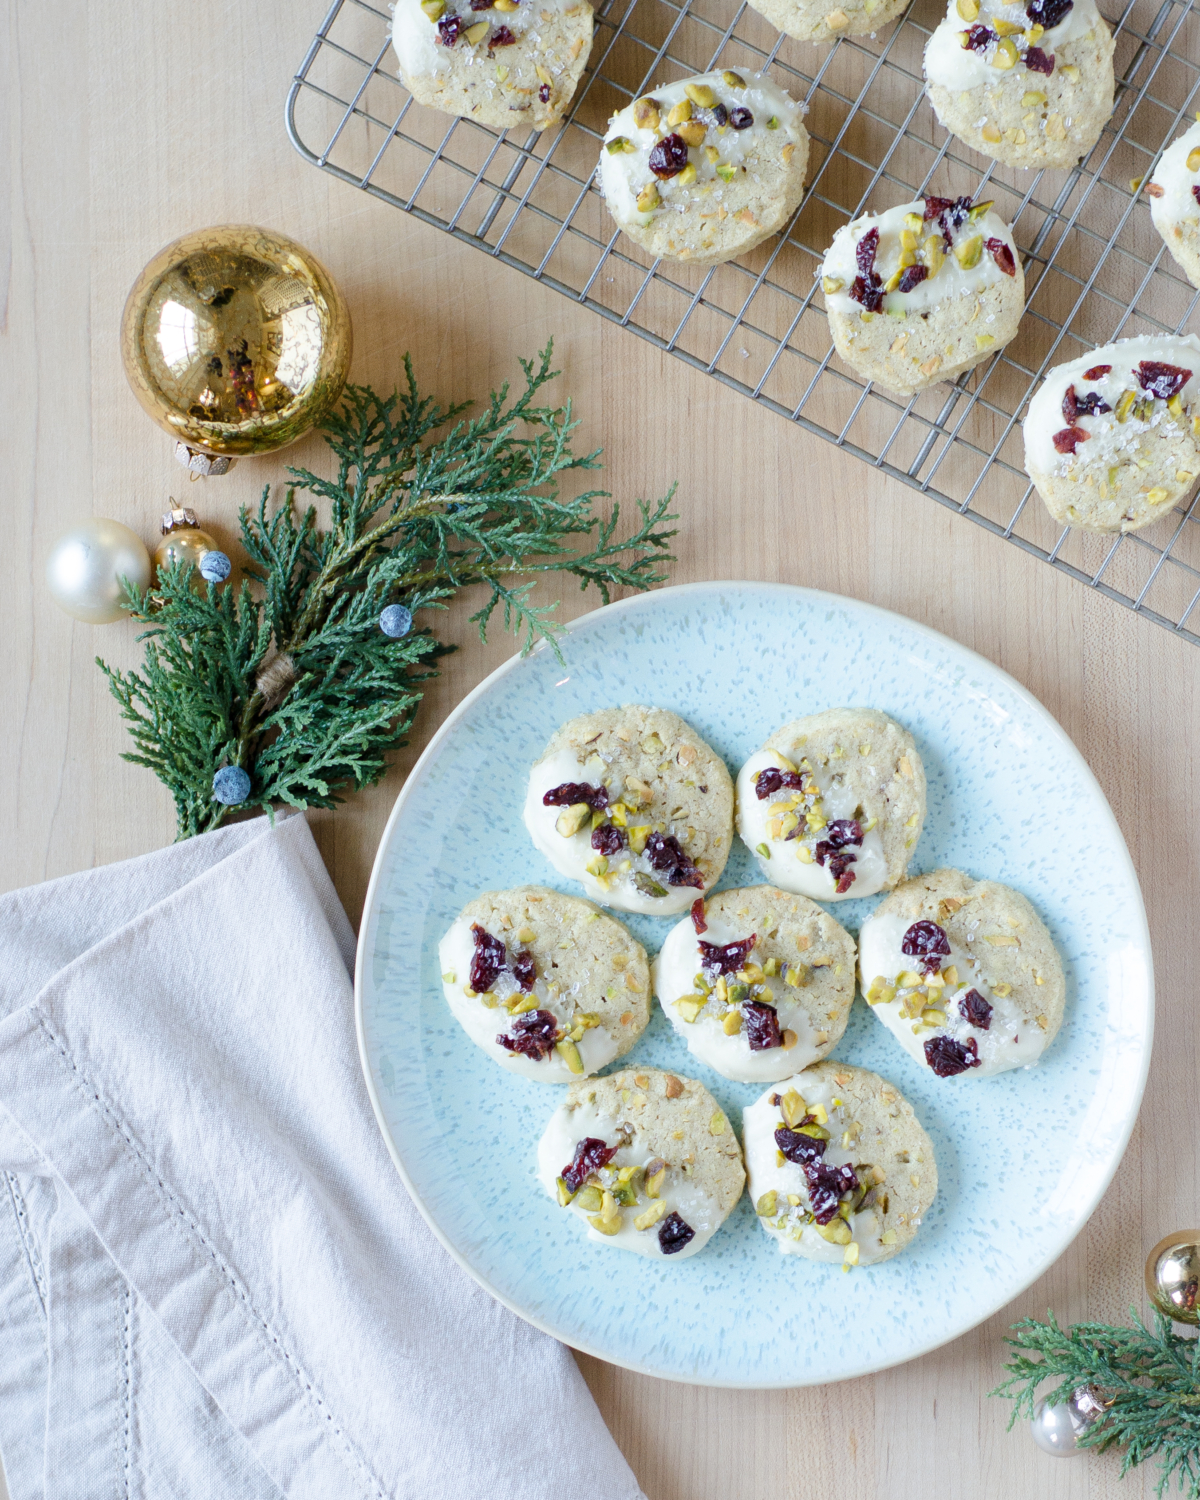 Pistachio cardamom butter cookies that are easy to make and taste nutty, creamy, and delicious. Perfect as a Christmas cookie with festive red and green accents!